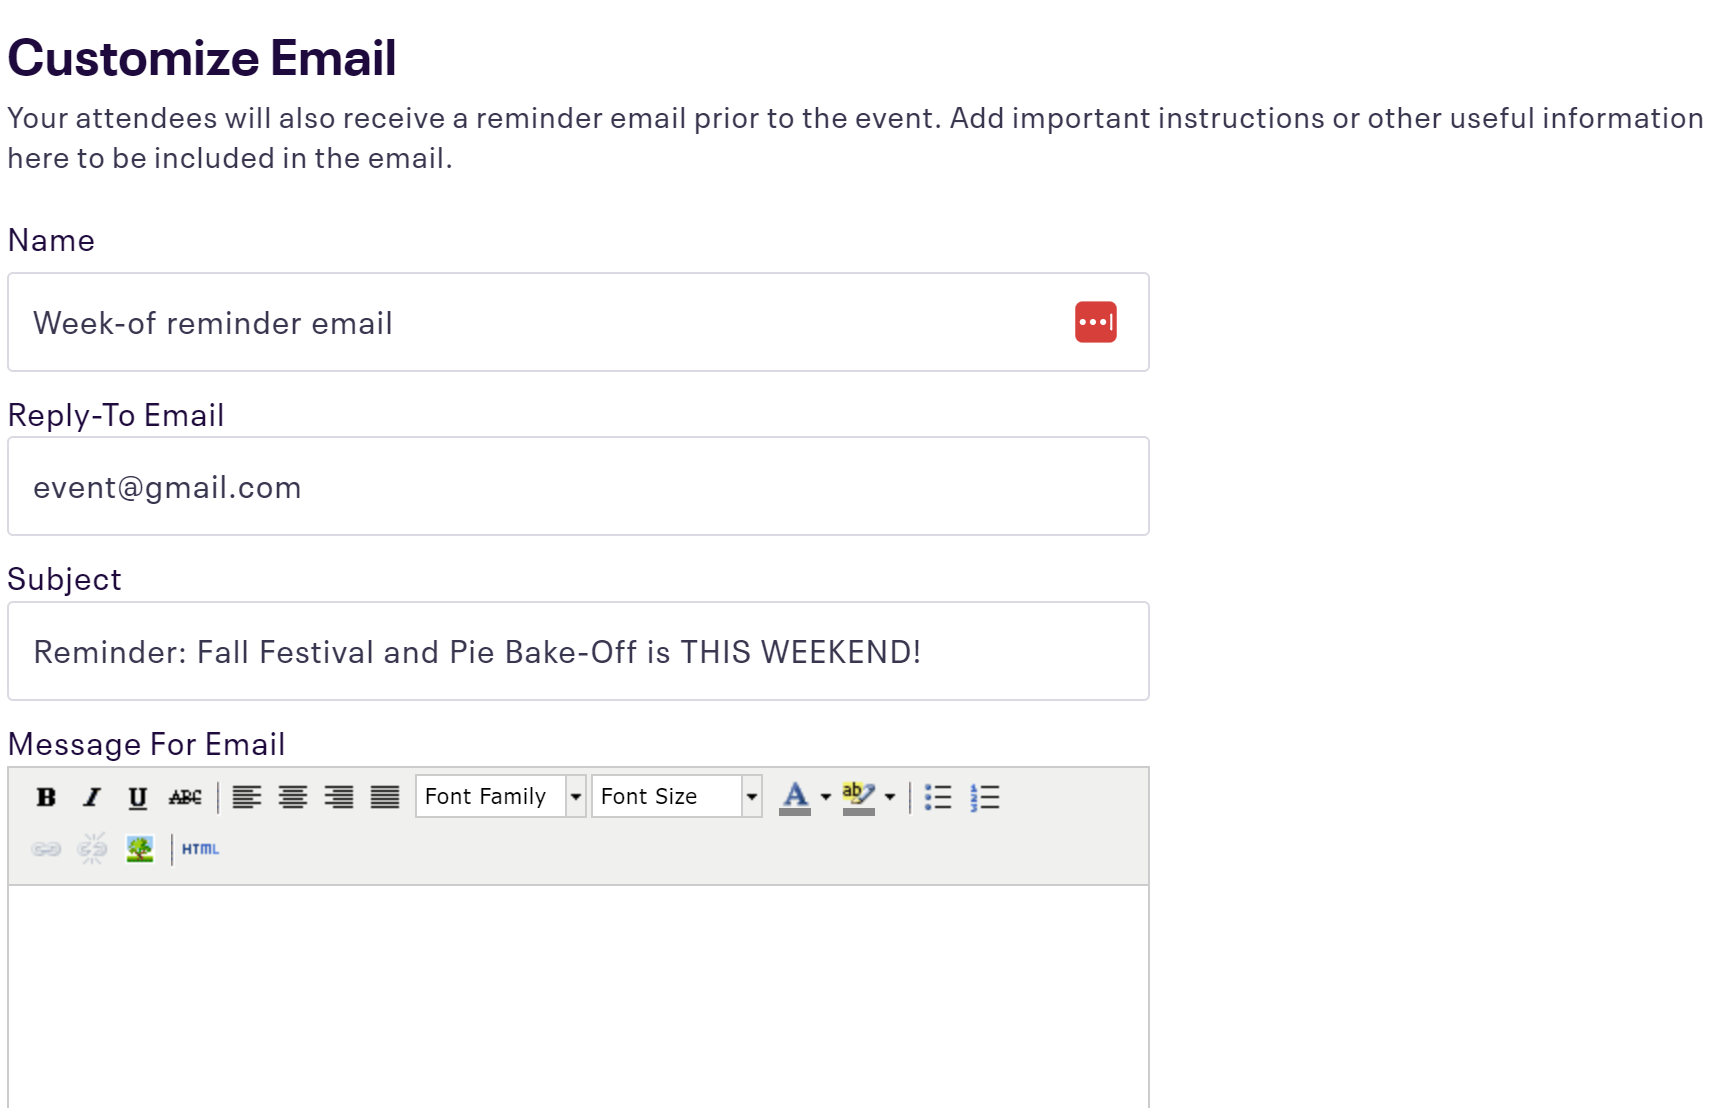 Writing an email on Eventbrite